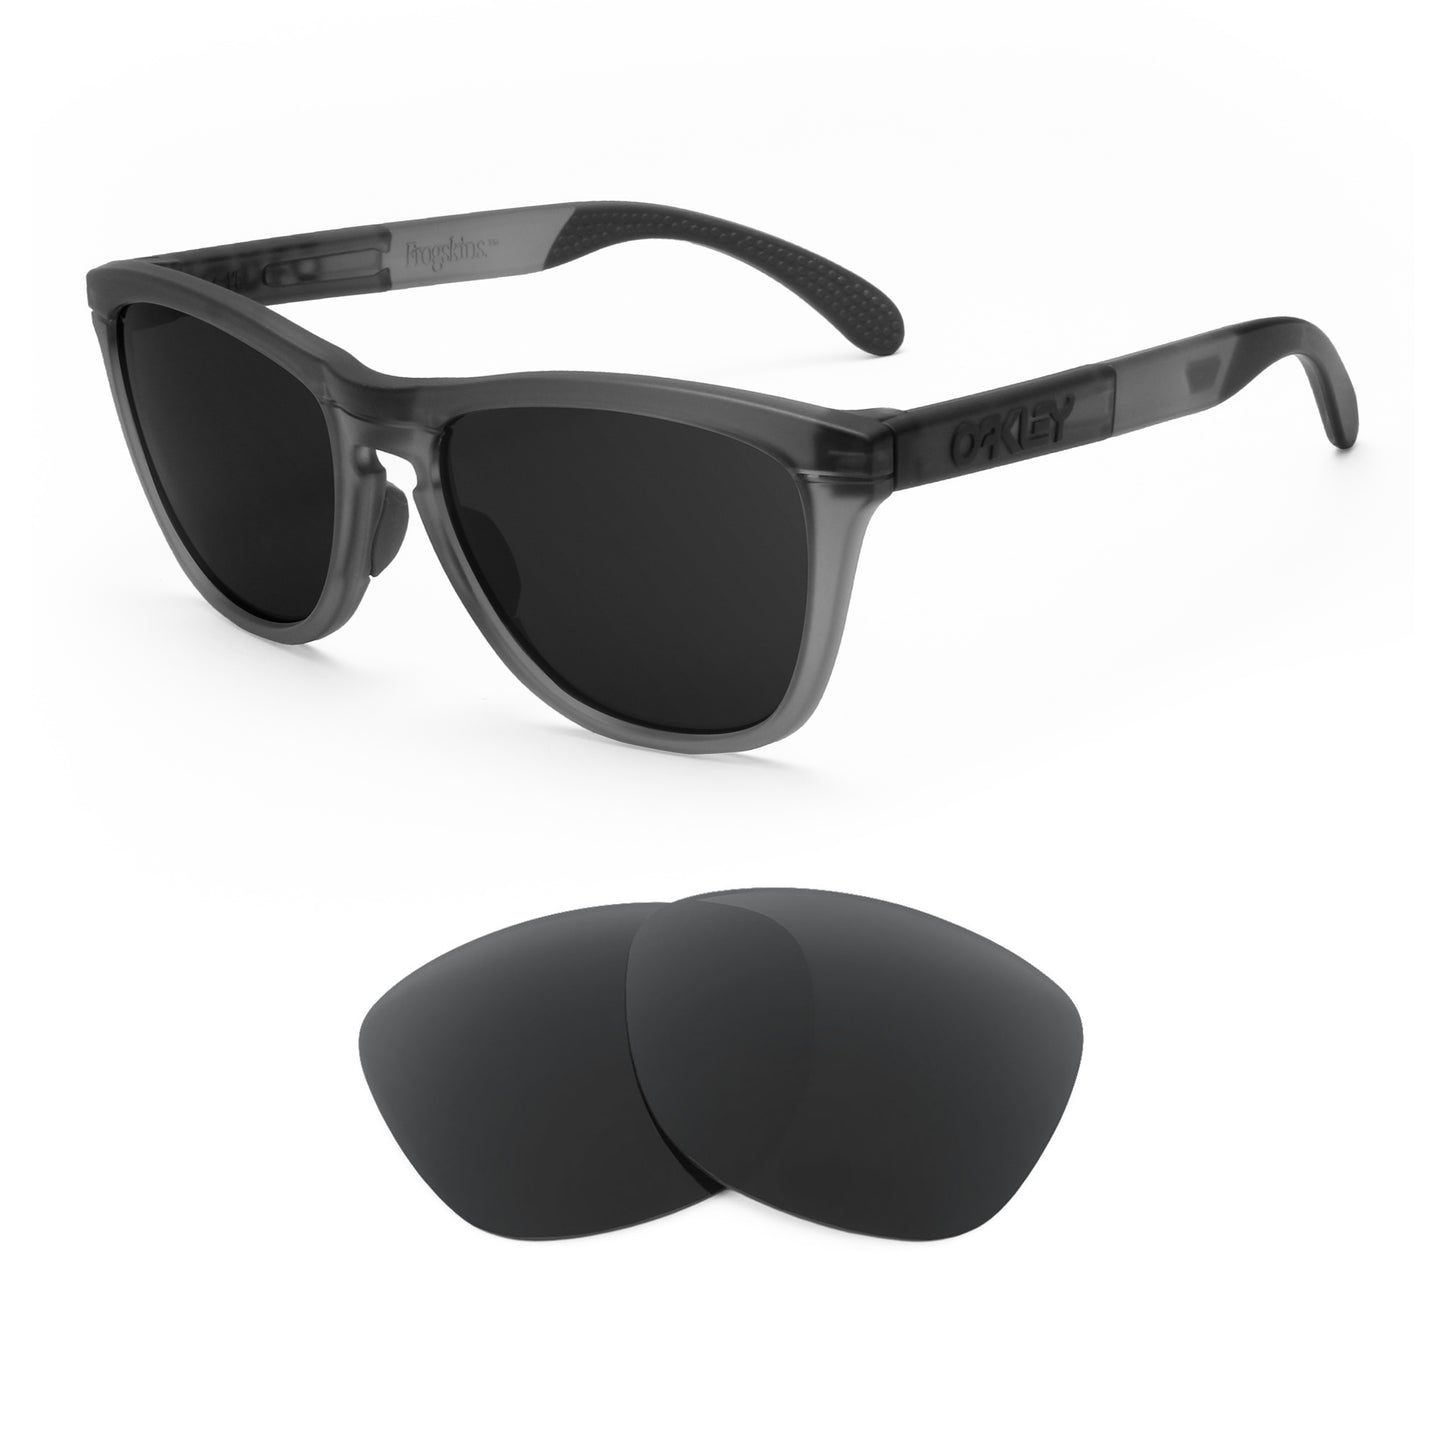 Oakley Frogskins Range sunglasses with replacement lenses